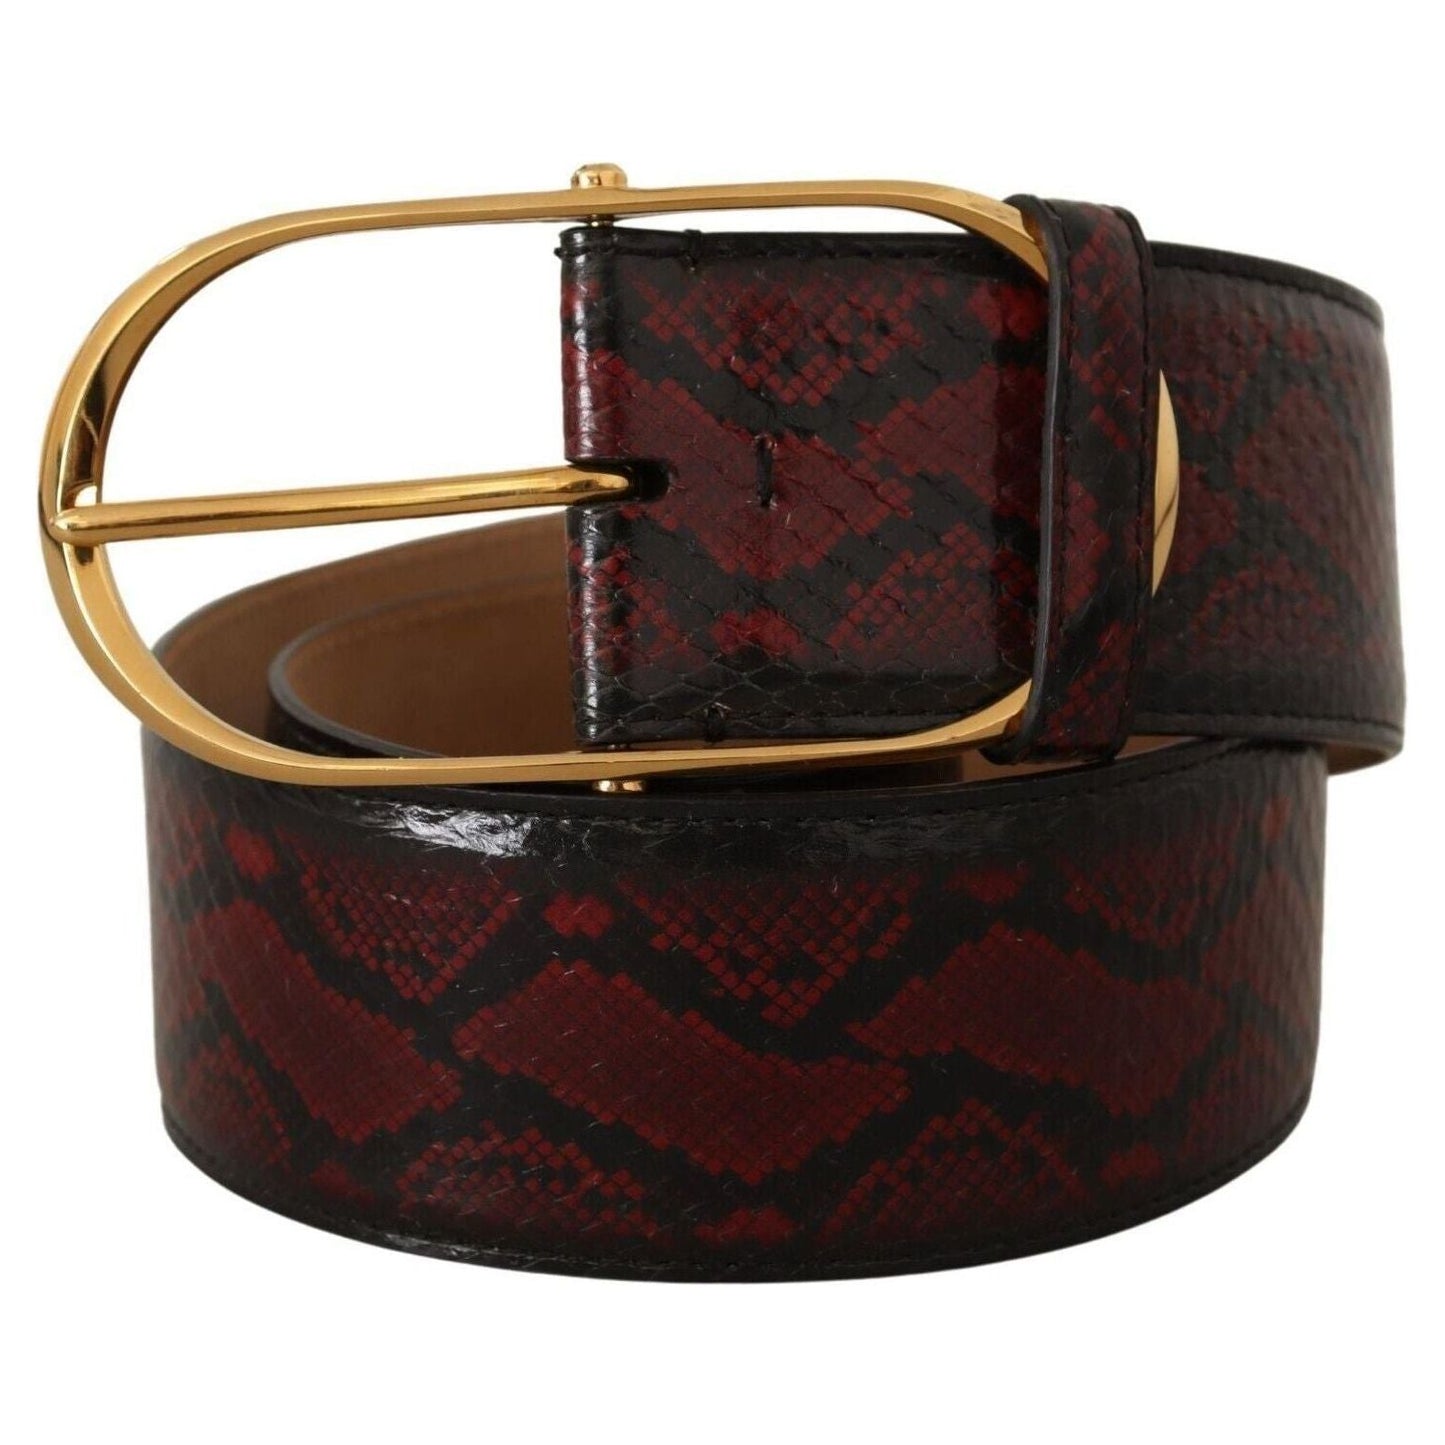 Dolce & Gabbana Elegant Red Python Leather Belt with Gold Buckle WOMAN BELTS red-exotic-leather-gold-oval-buckle-belt